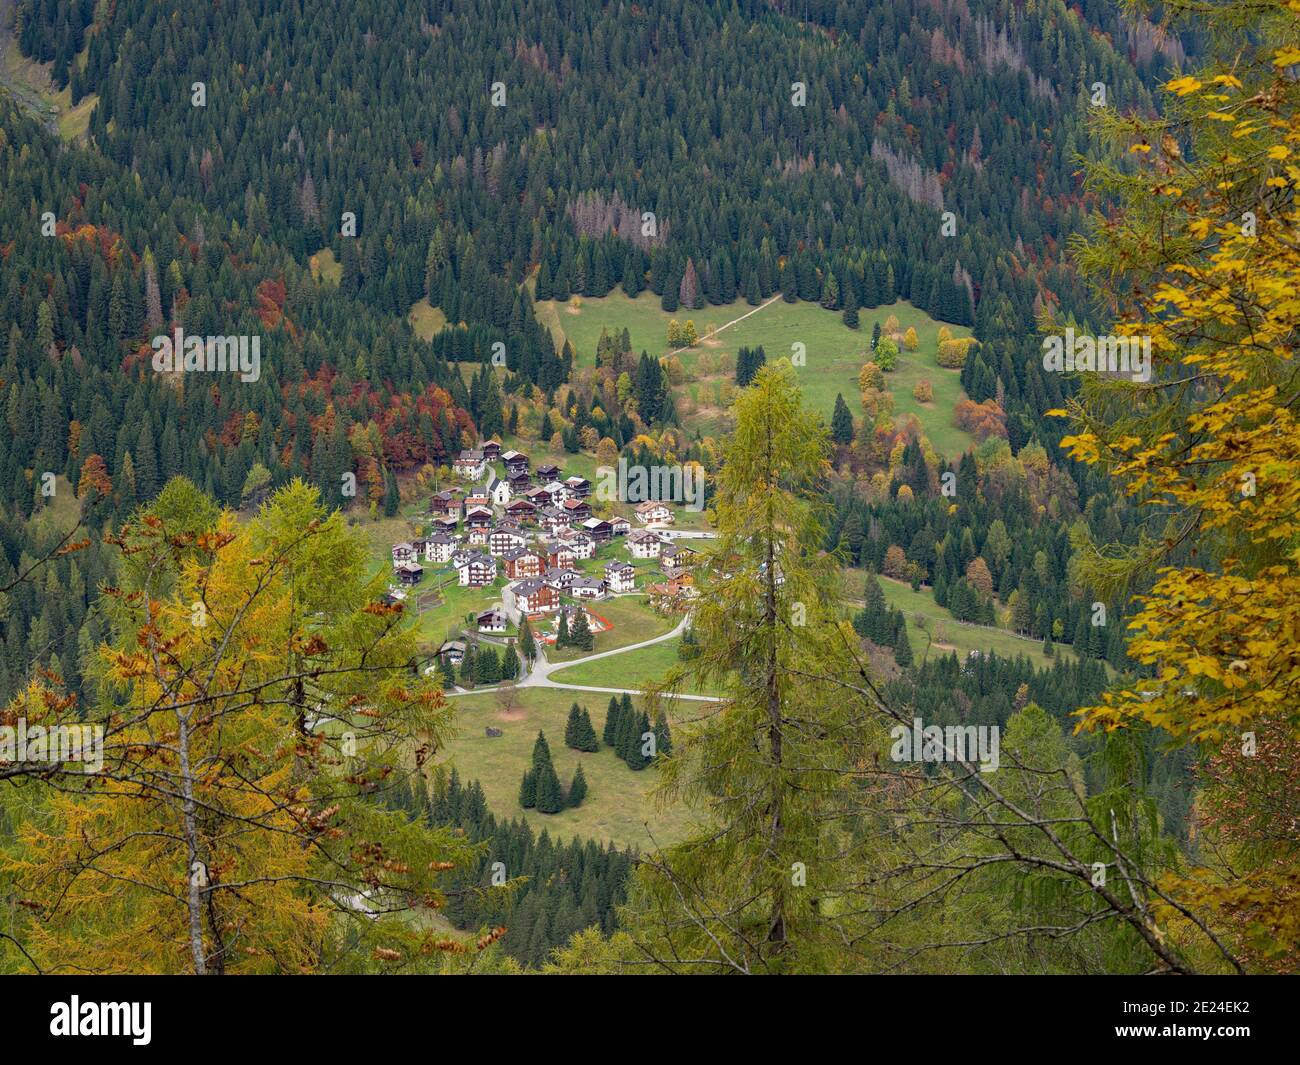 Village Gares , traditional alpine architecture in valley Valle di Gares,  Pale di San Martino. Pala is part of the UNESCO world heritage Dolomites. E Stock Photo